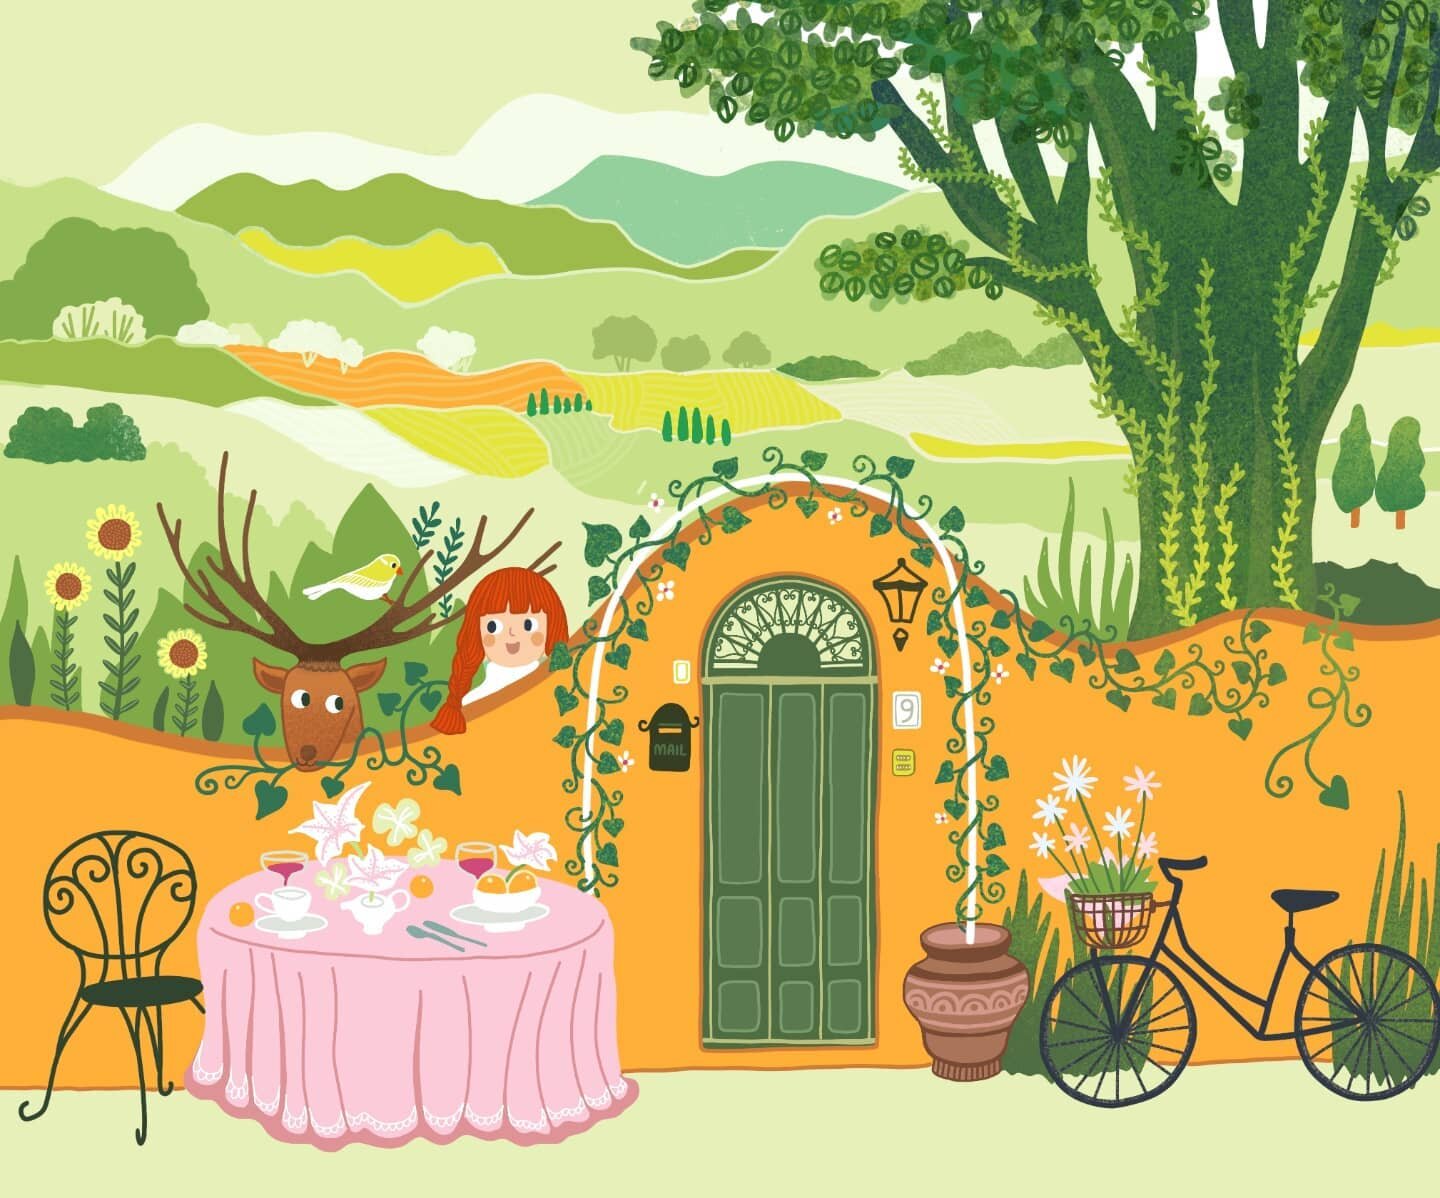 Can't help to dream of our future home...

#italy #counrtyside #dreamhouse #illustration #childrenillustration @scbwi #europetravel #editorialillustration #editorial #afternoontea #nature #colorful @dirillustration @theaoi 
@pterlip @andreabrownlit